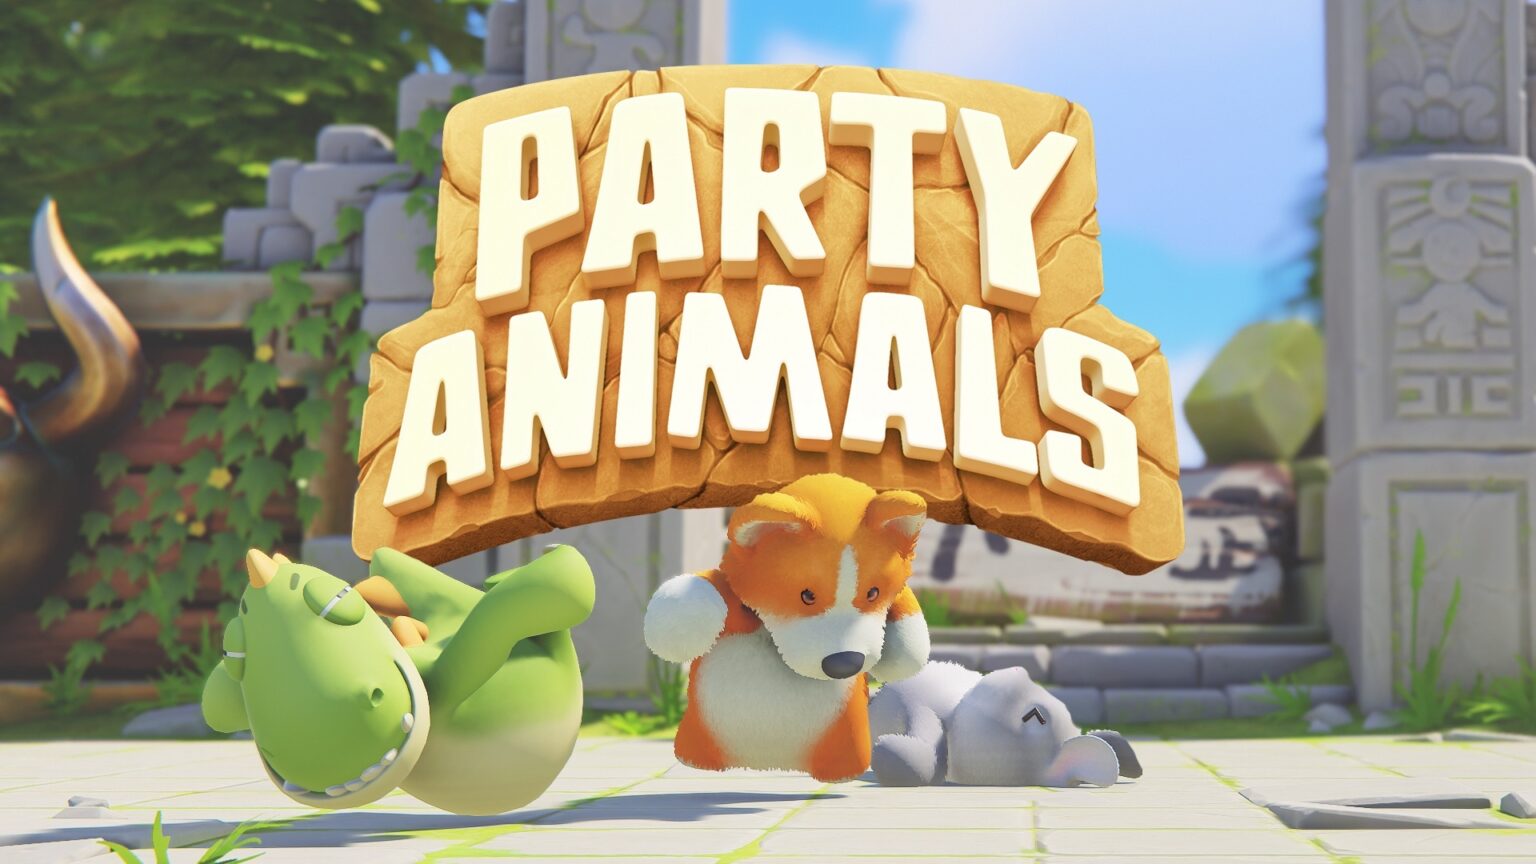 cool math games party animals